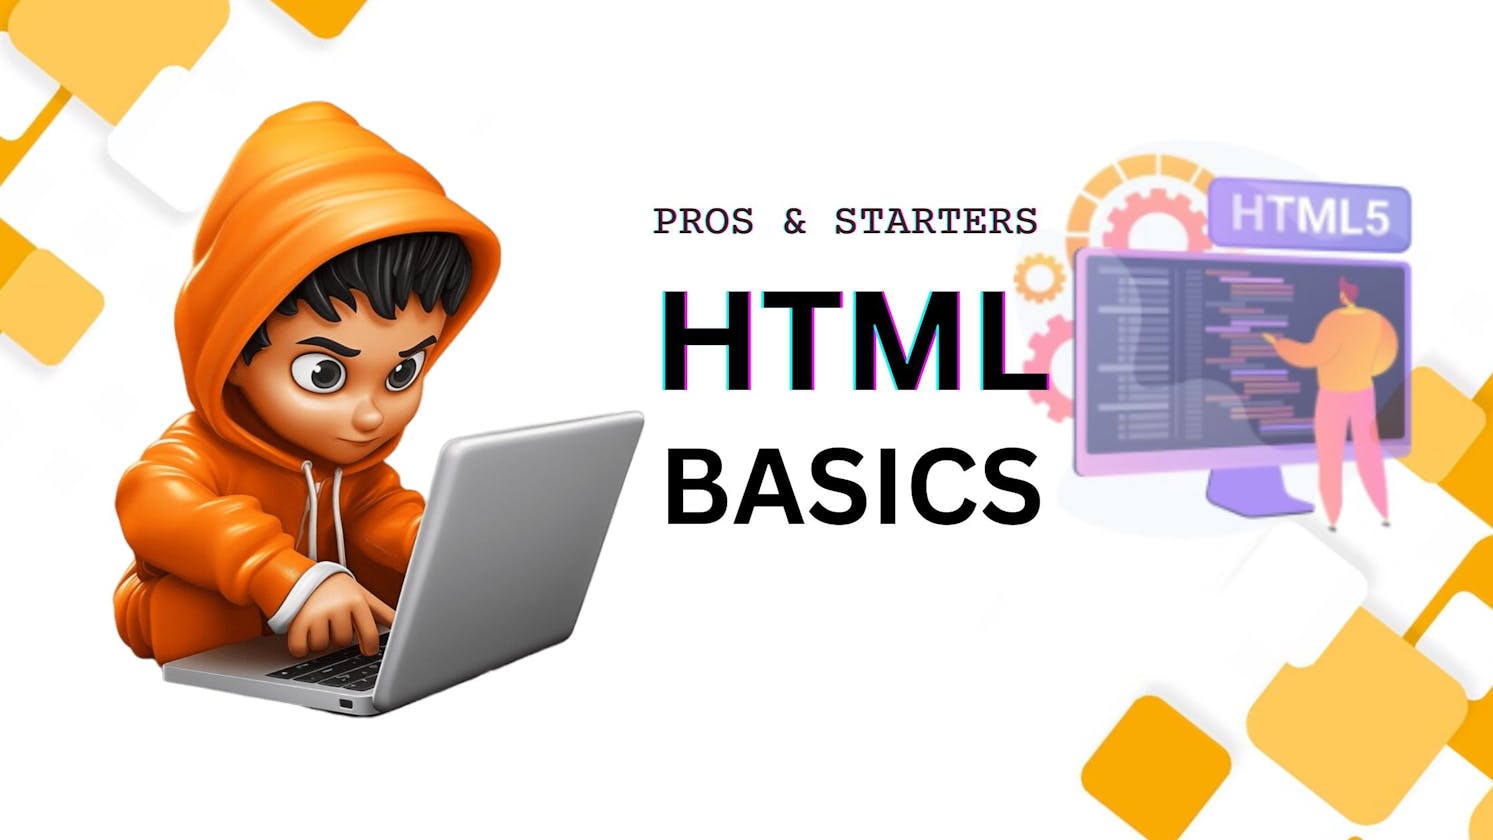 HTML Basics: A Simplified Guide to HTML Tags and Elements